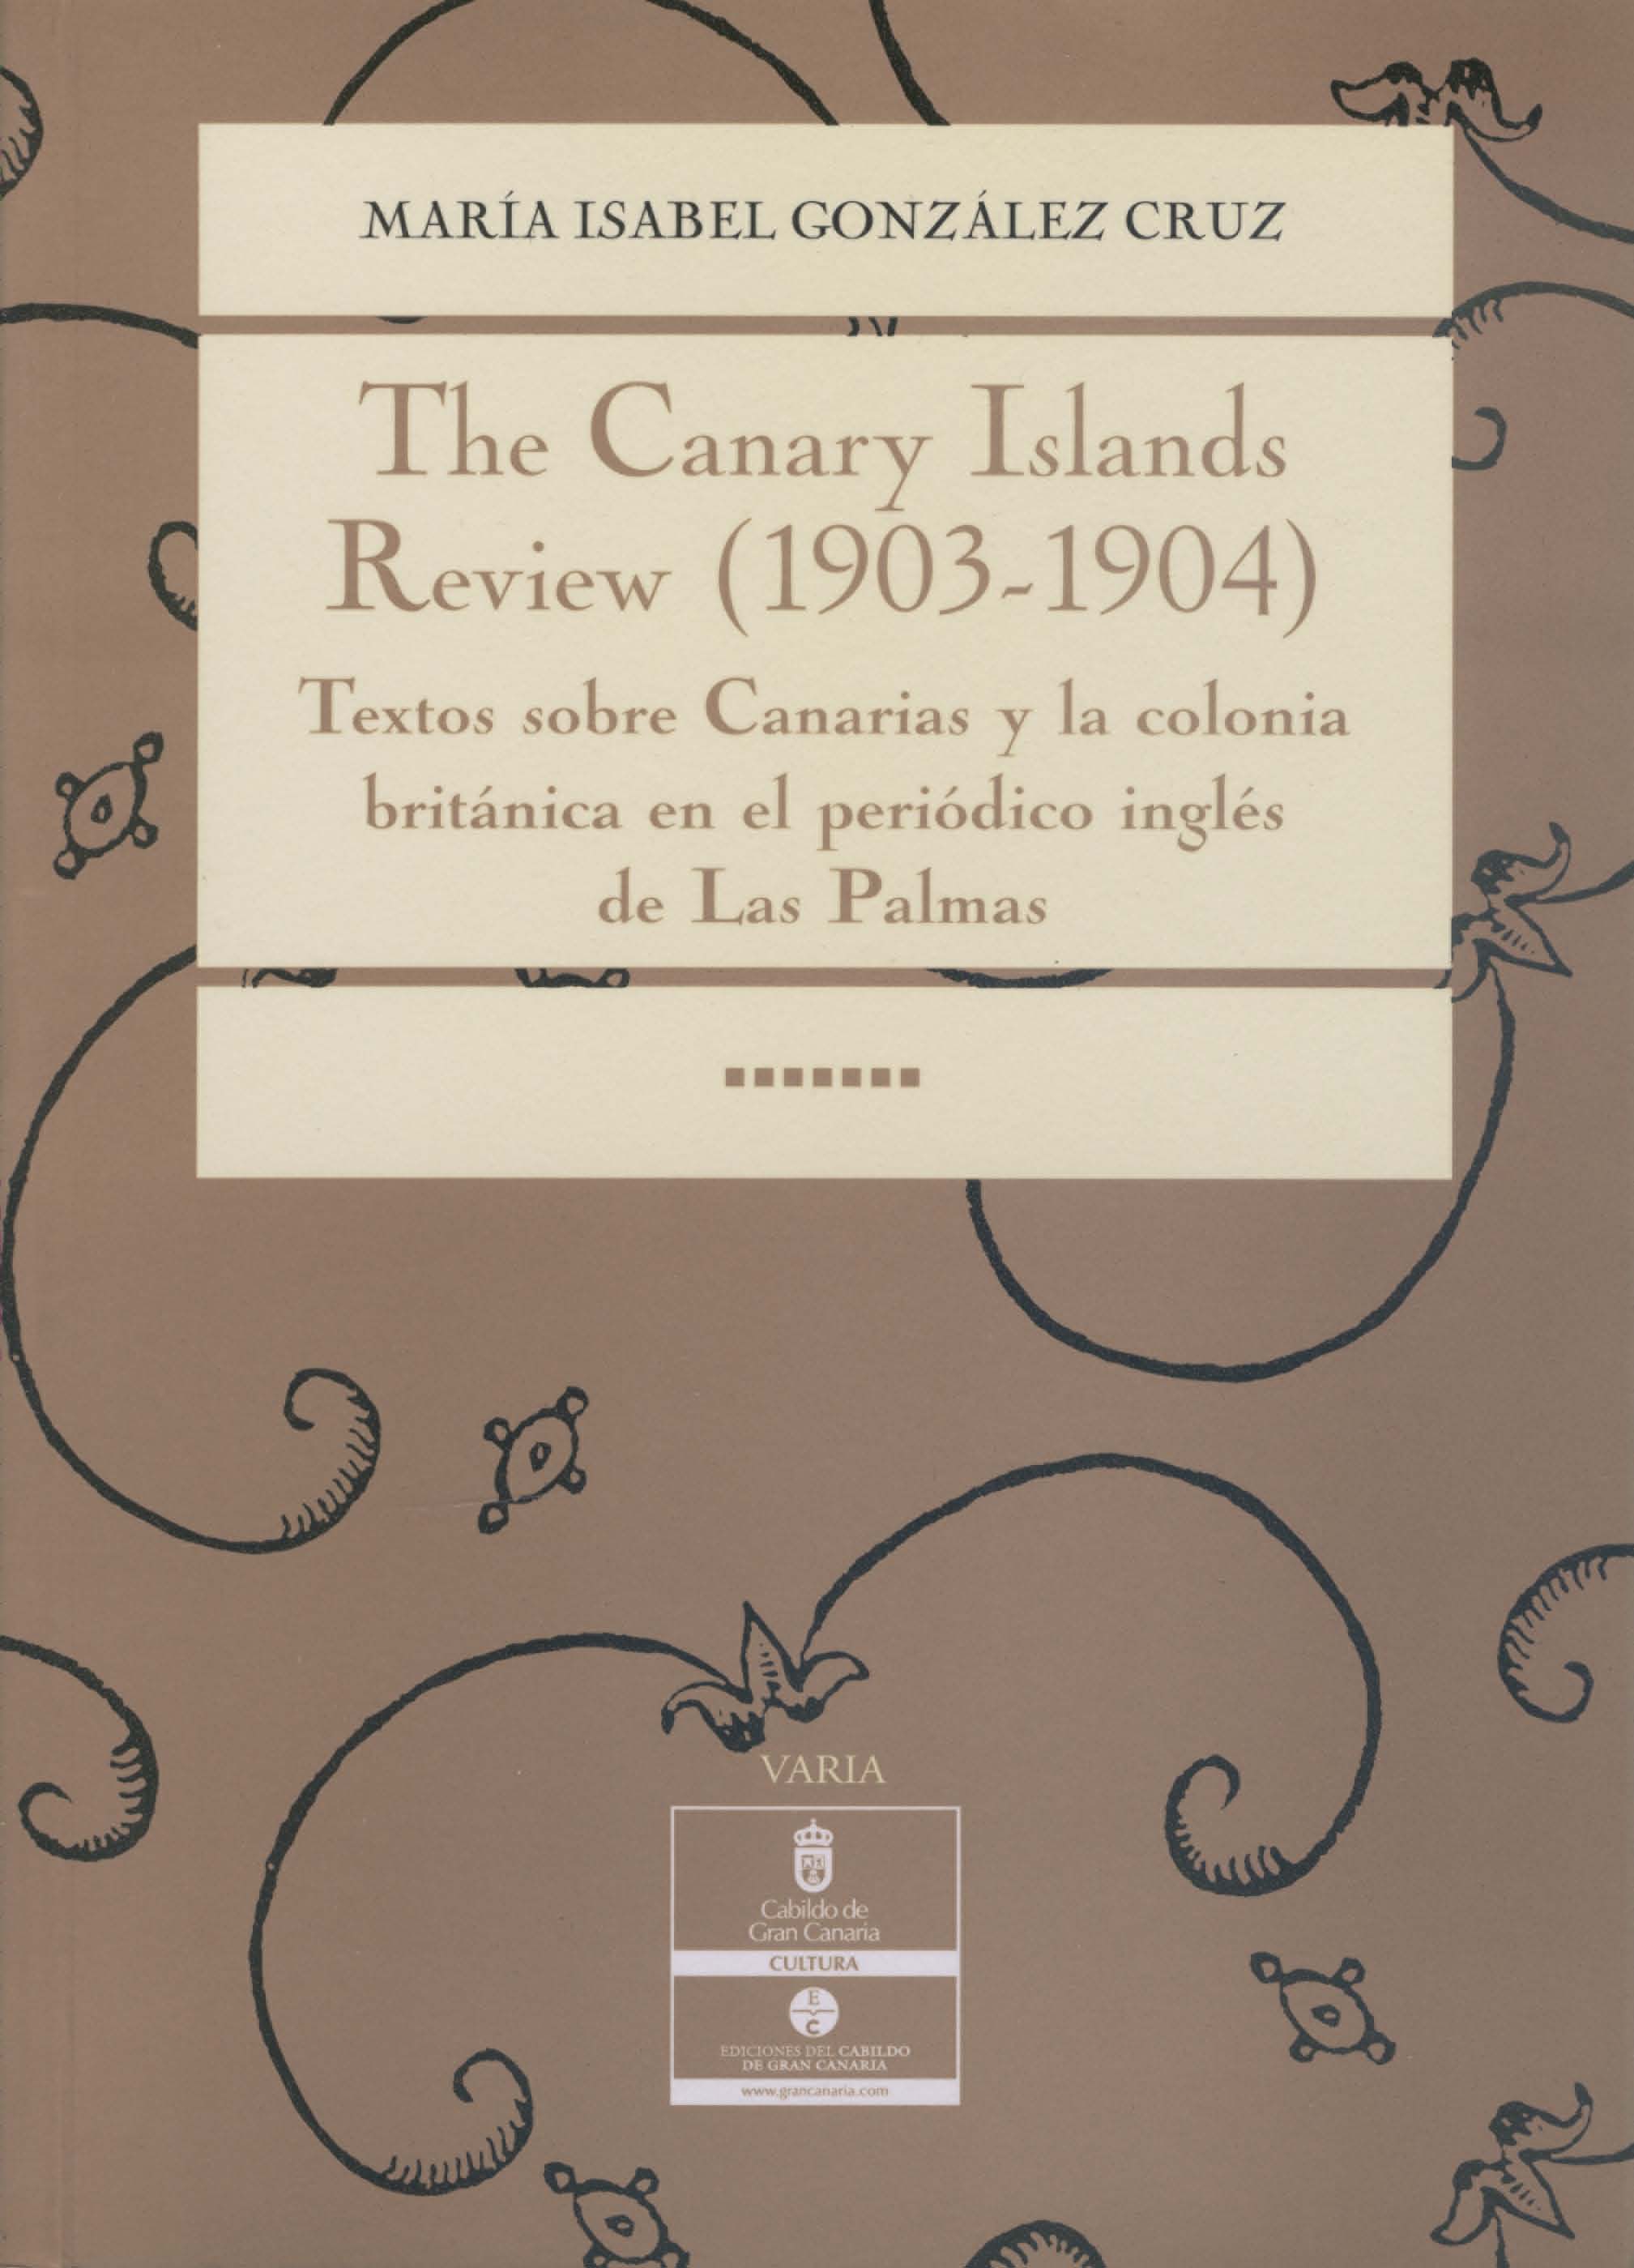 The Canary Islands review (1903-1904)